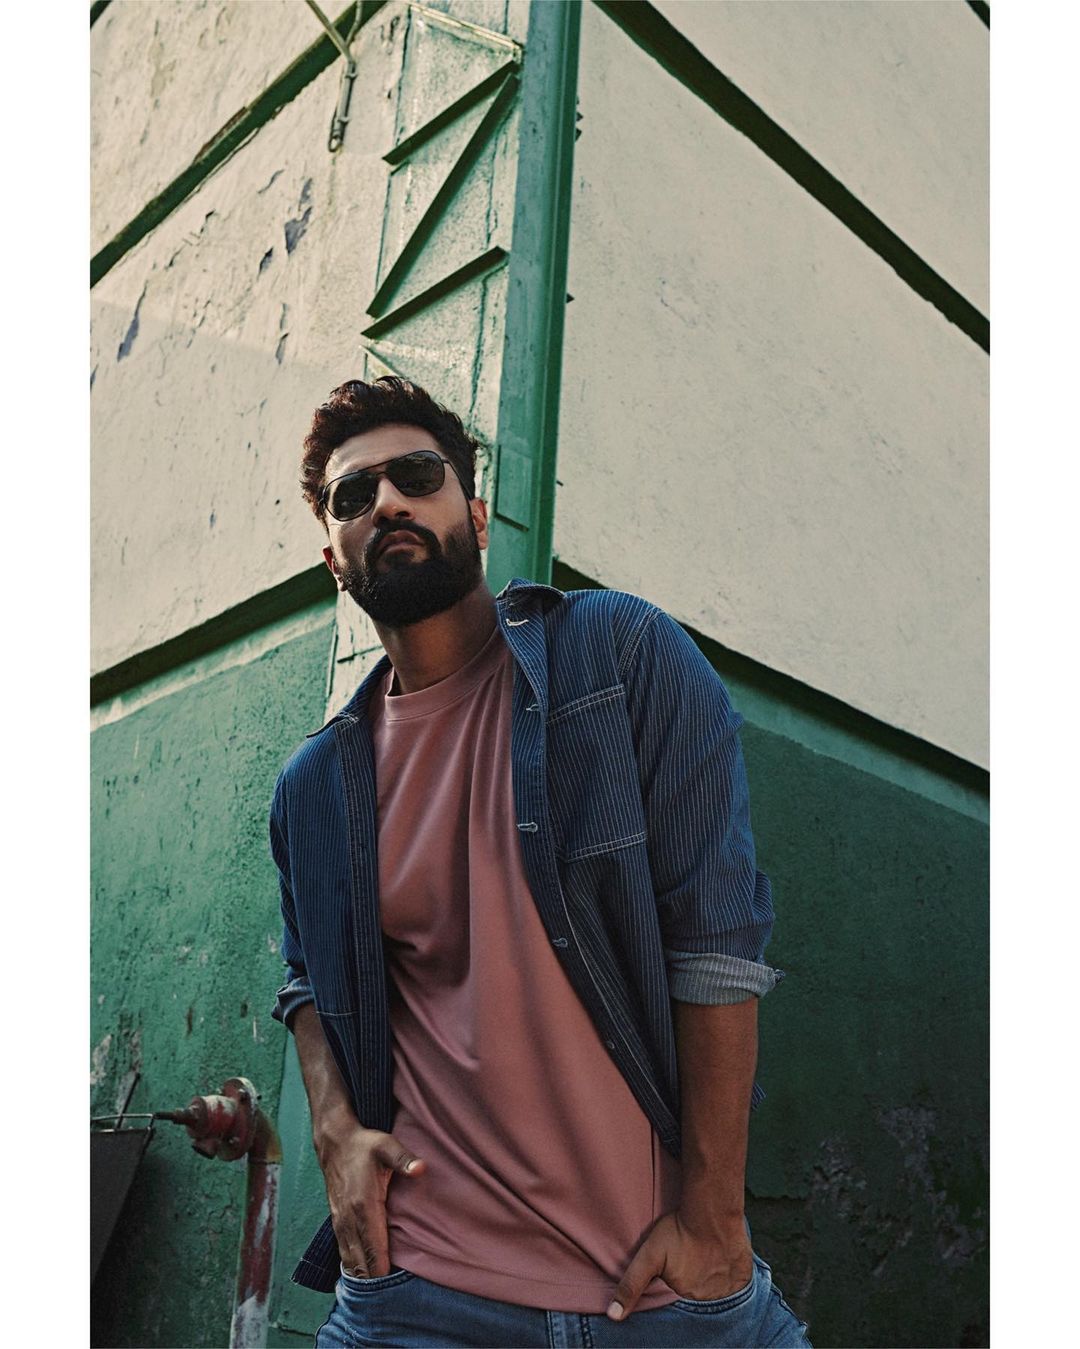 Vicky Kaushal strikes a pose in the lilac tee and denim shirt